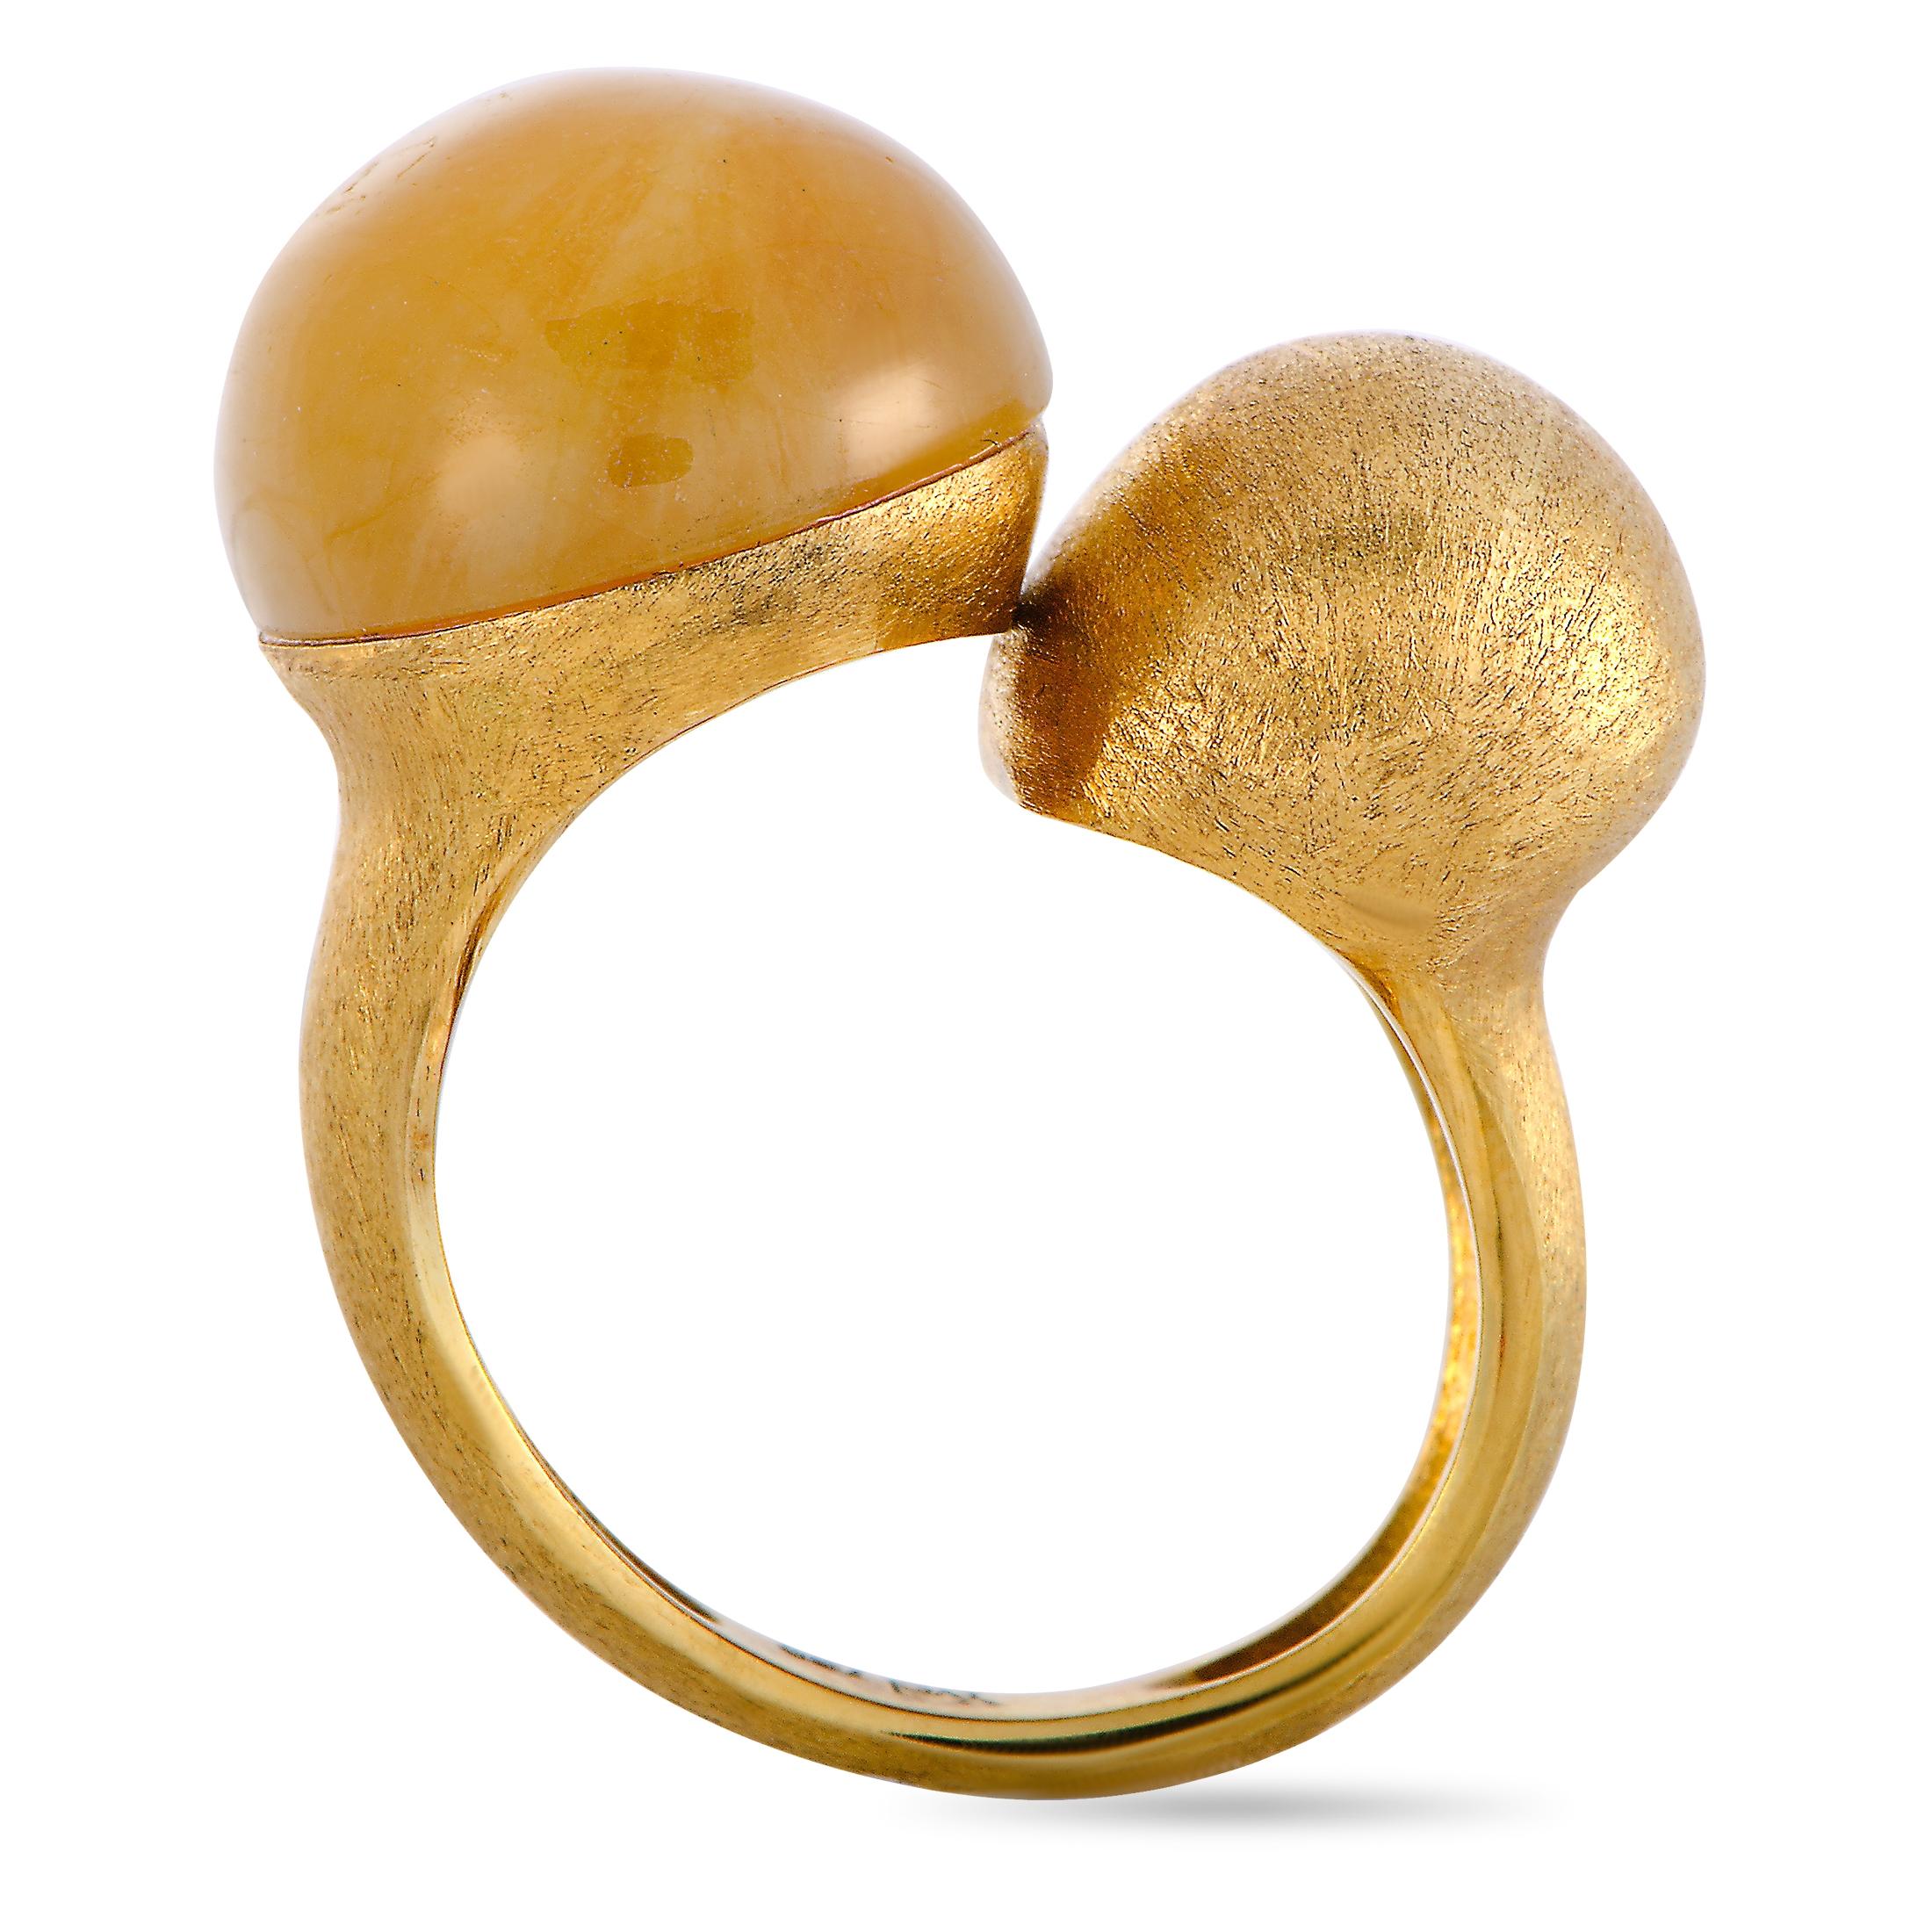 This ring by Yvel is crafted from 18K yellow gold and set with a gemstone. The ring weighs 16 grams, boasting band thickness of 4 mm and top height of 11 mm, while top dimensions measure 17 by 25 mm.
 
 Offered in brand new condition, this item